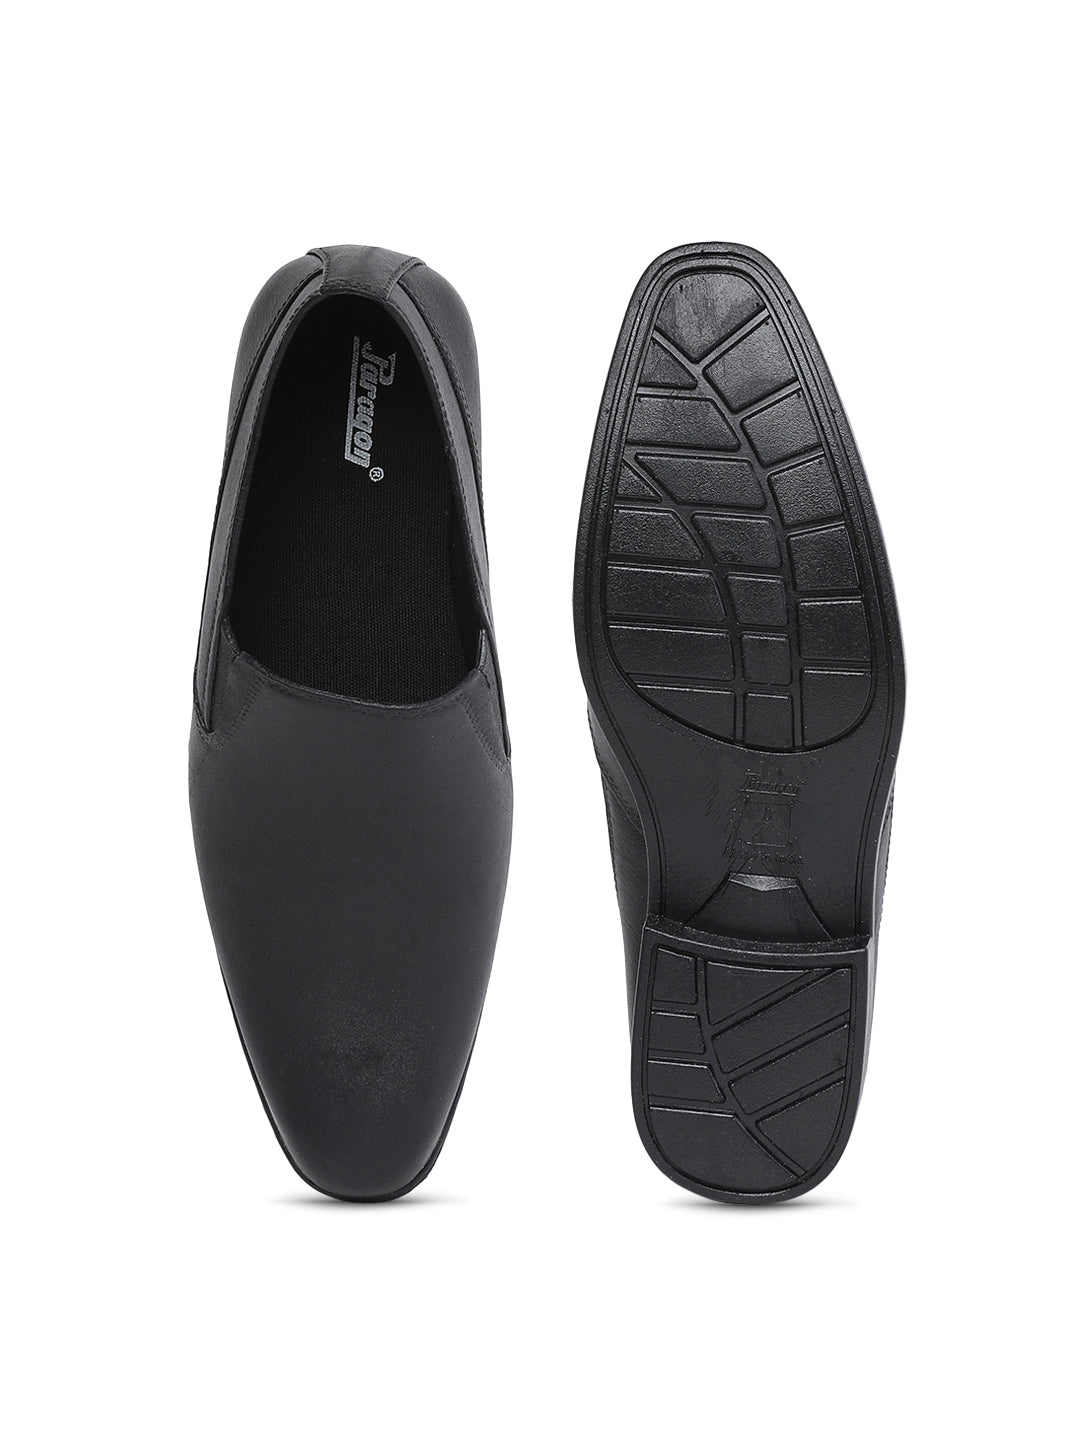 Paragon PV0343G Men Formal Shoes | Corporate Office Shoes | Smart &amp; Sleek Design | Comfortable Sole with Cushioning | Daily &amp; Occasion Wear